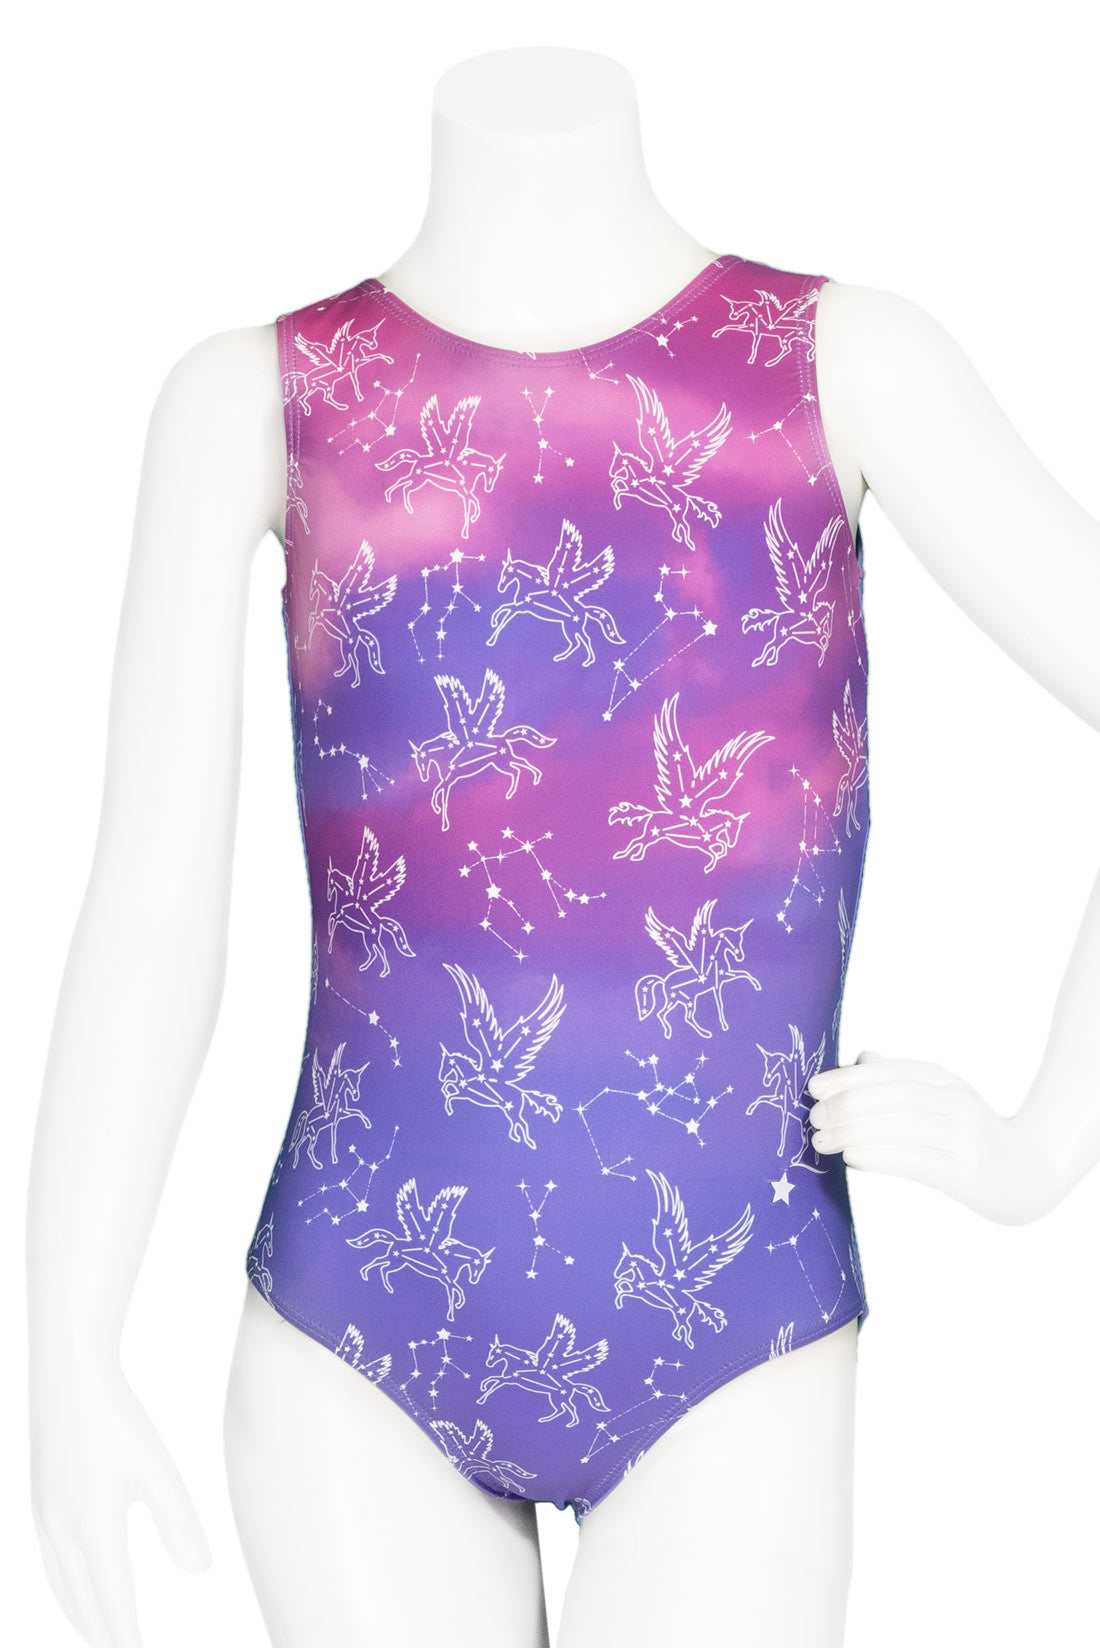 A gymnastics leotard front with a pink cloud background and a pegasus and constellation design by Destira, 2023